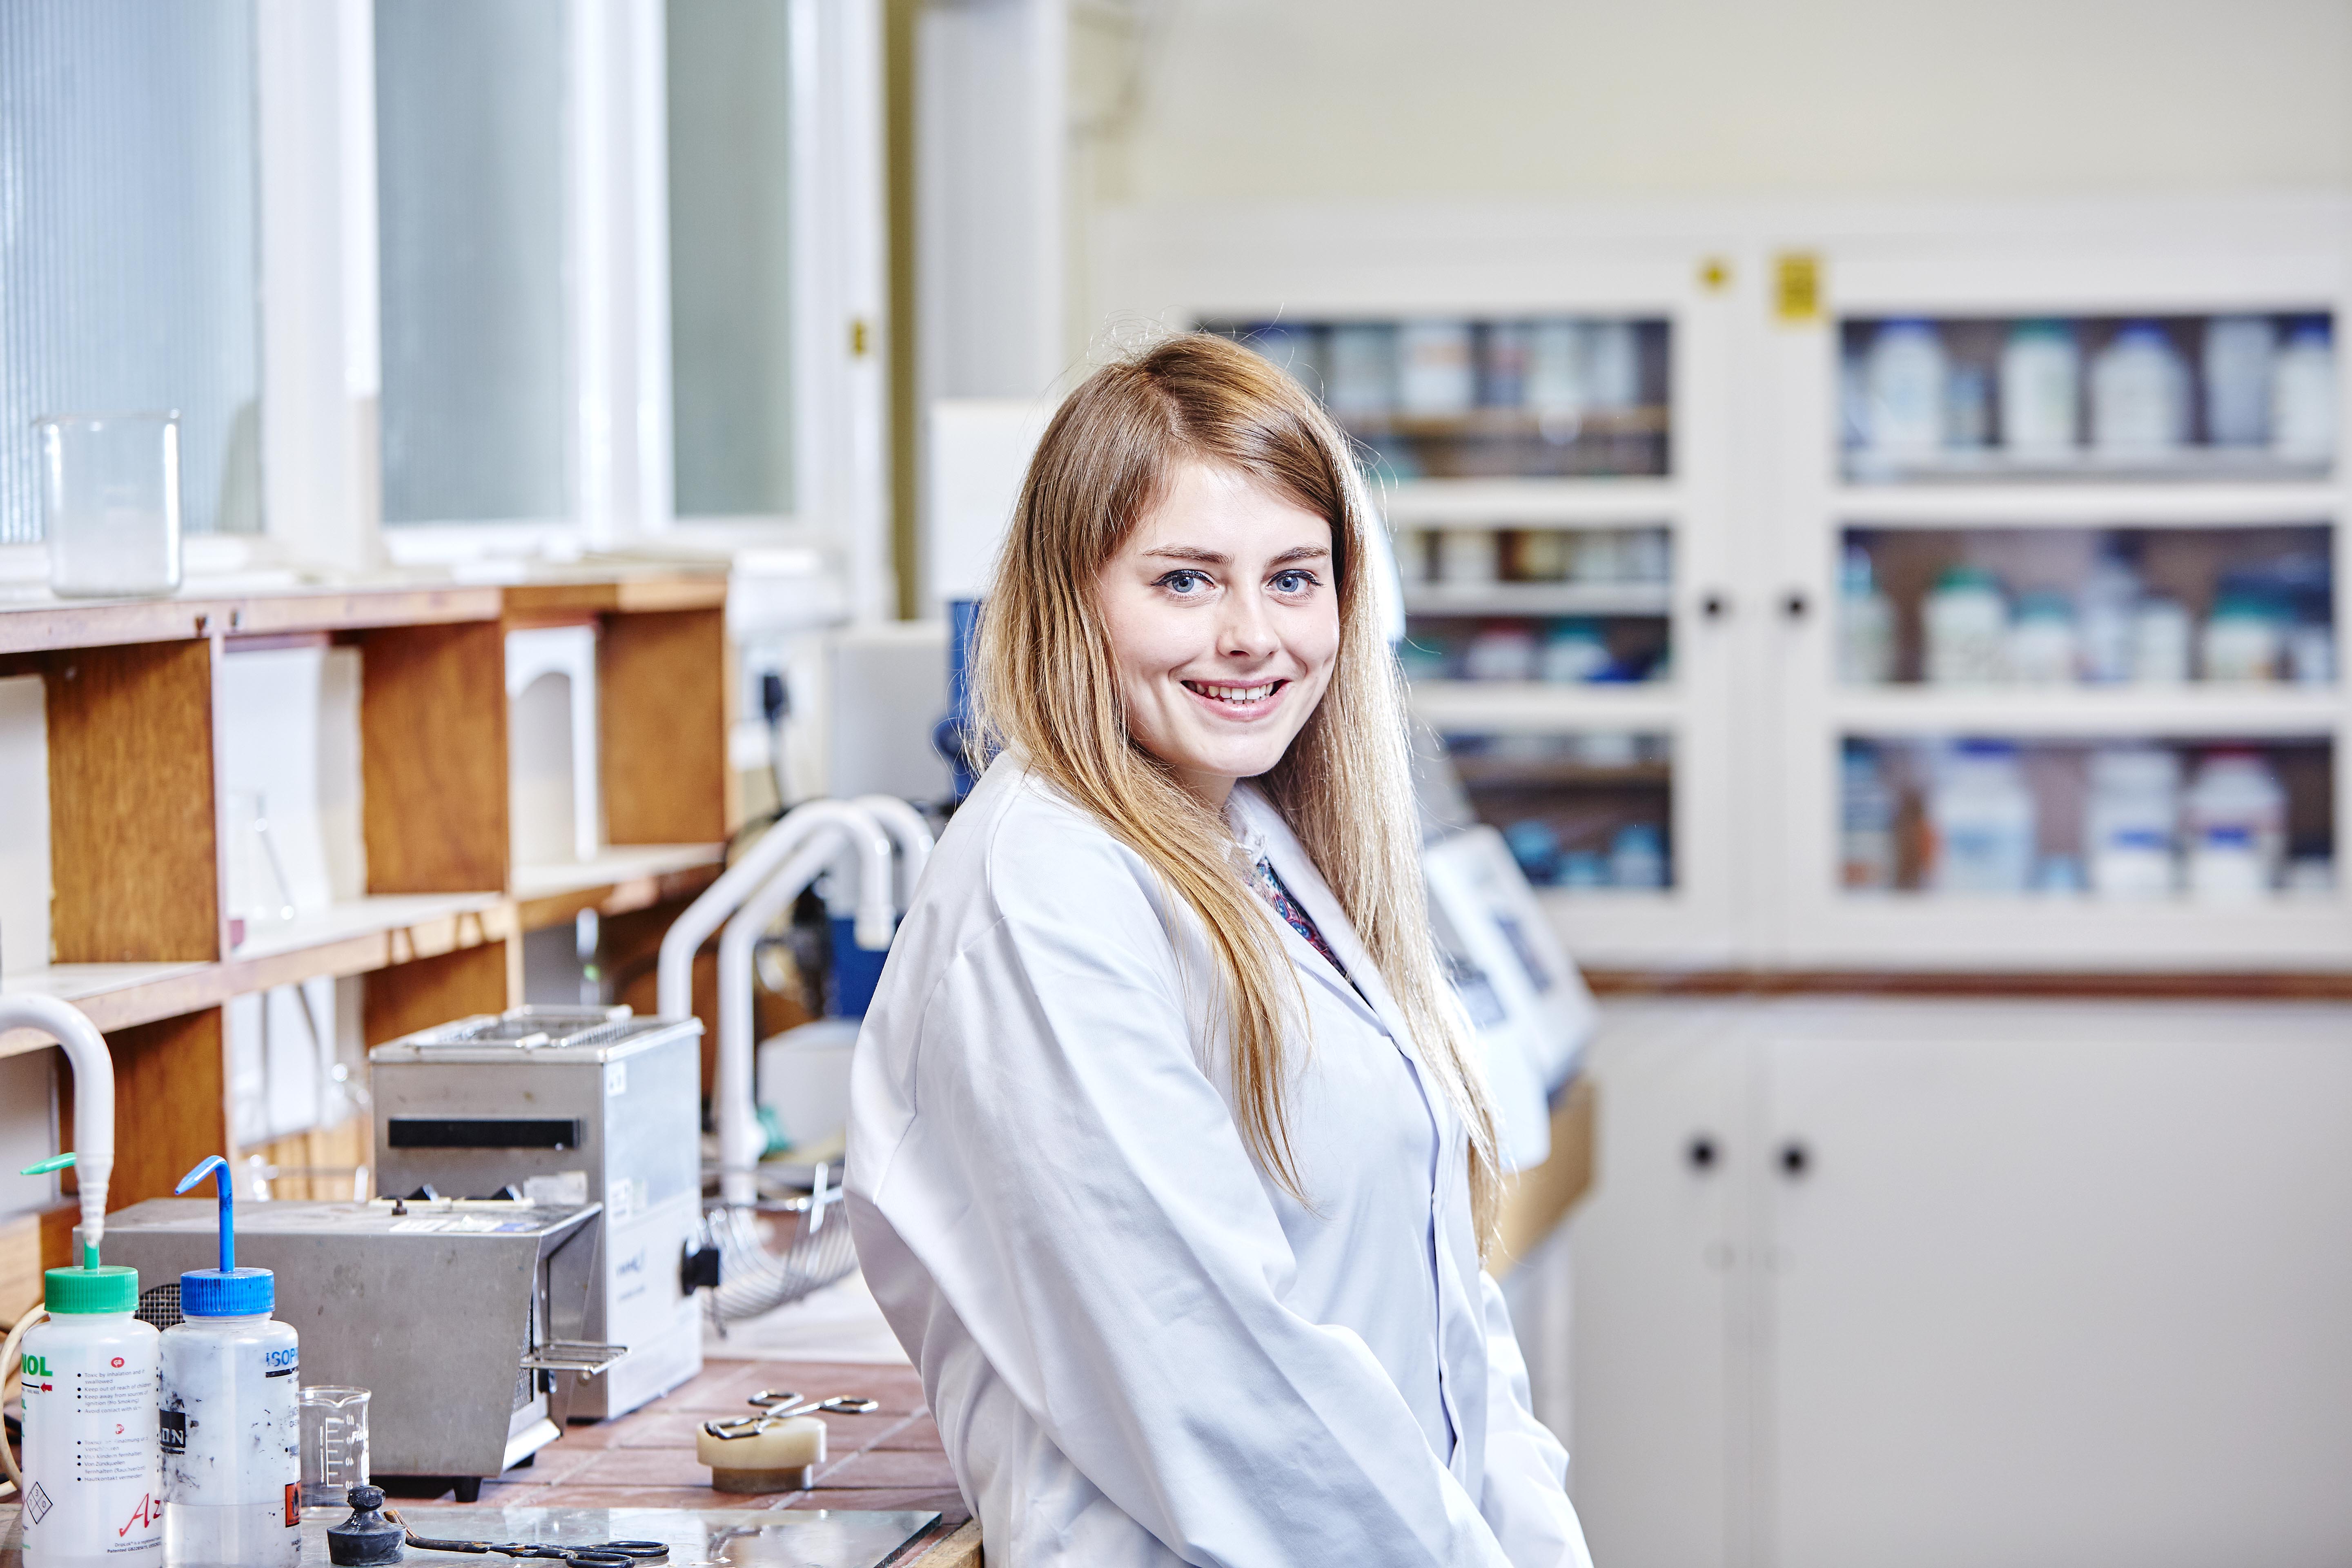 Hannah Gee on her industrial placement year at Indivior